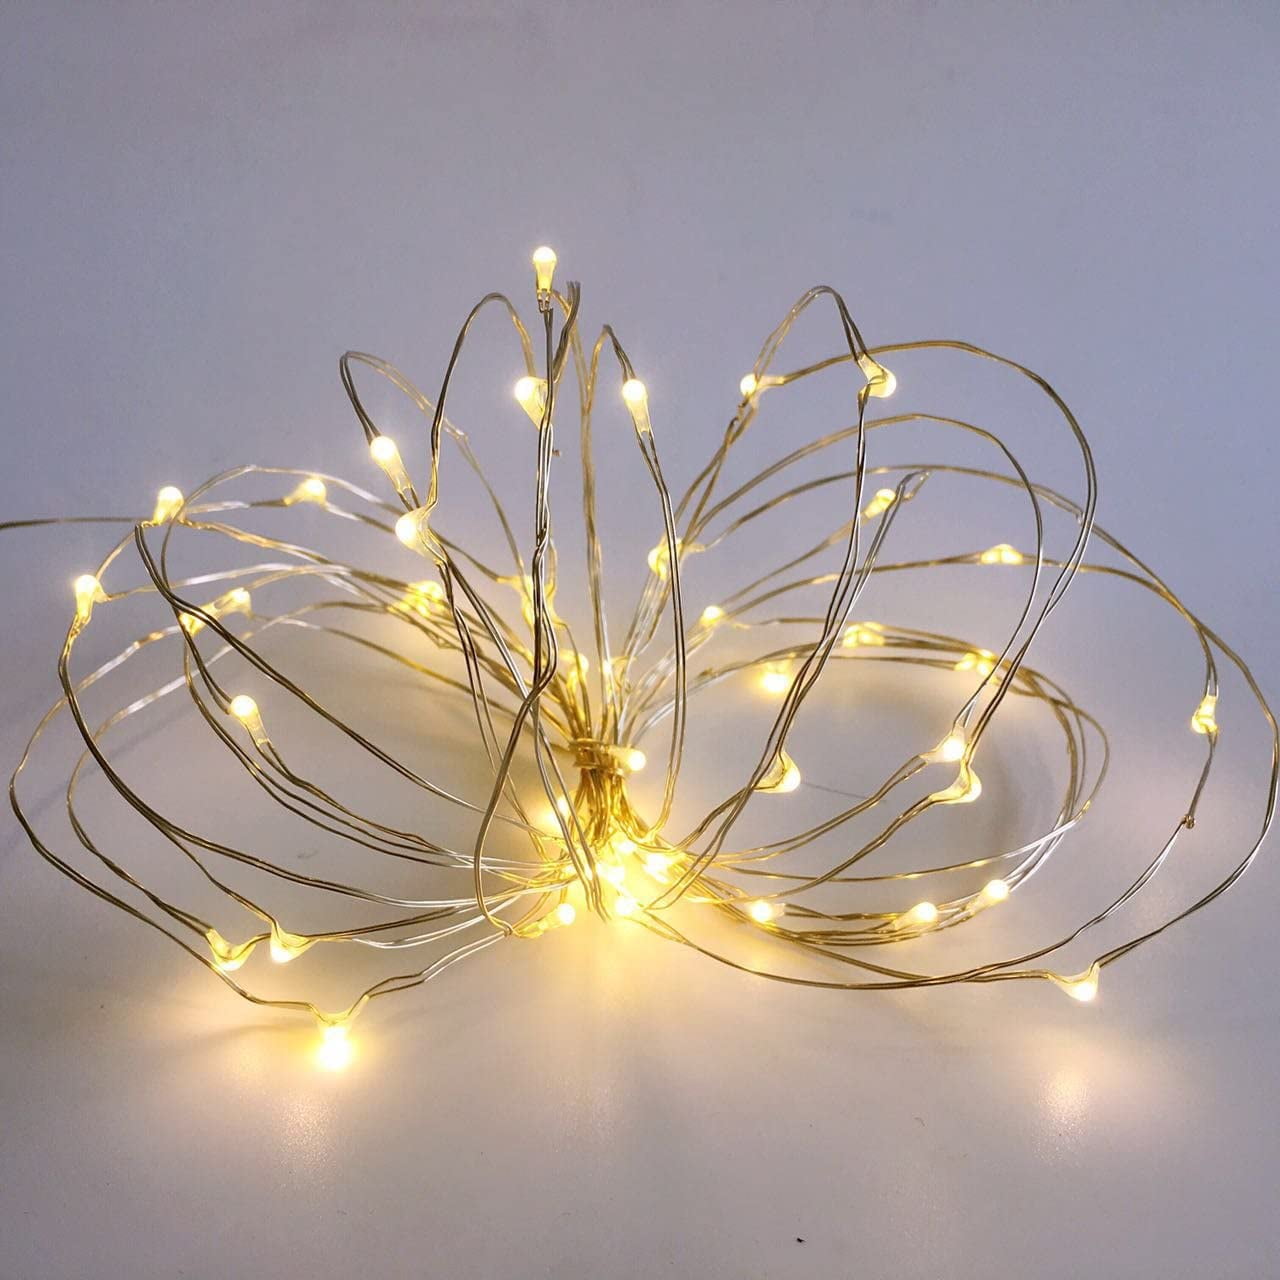 Tiny Lites Silver Wire Indoor and Outdoor LED Light String 9.8-Feet Warm White 